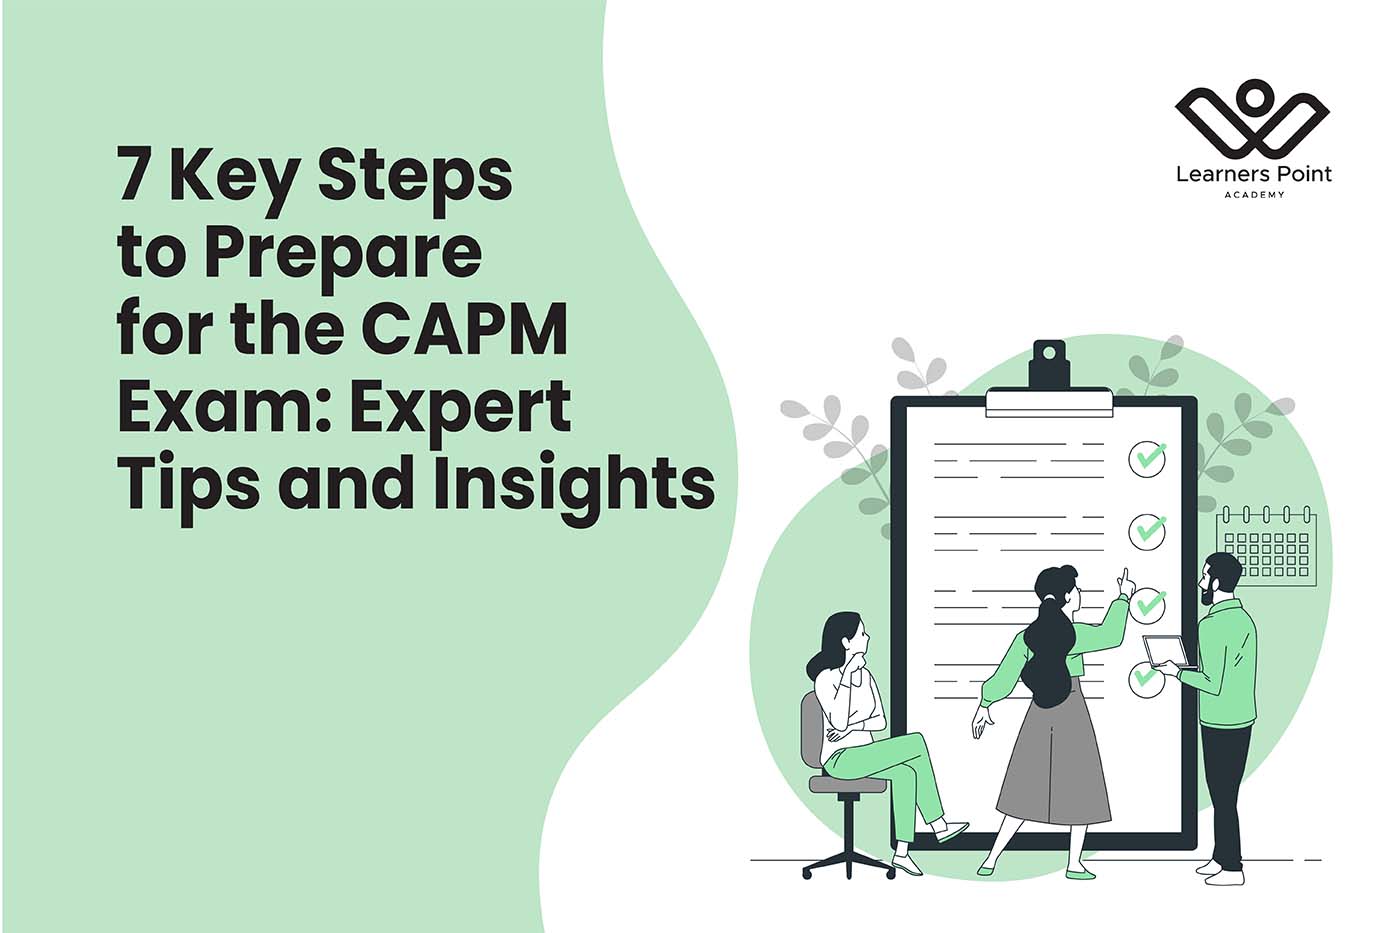 7 Key Steps to Prepare for the CAPM Exam: Expert Tips and Insights